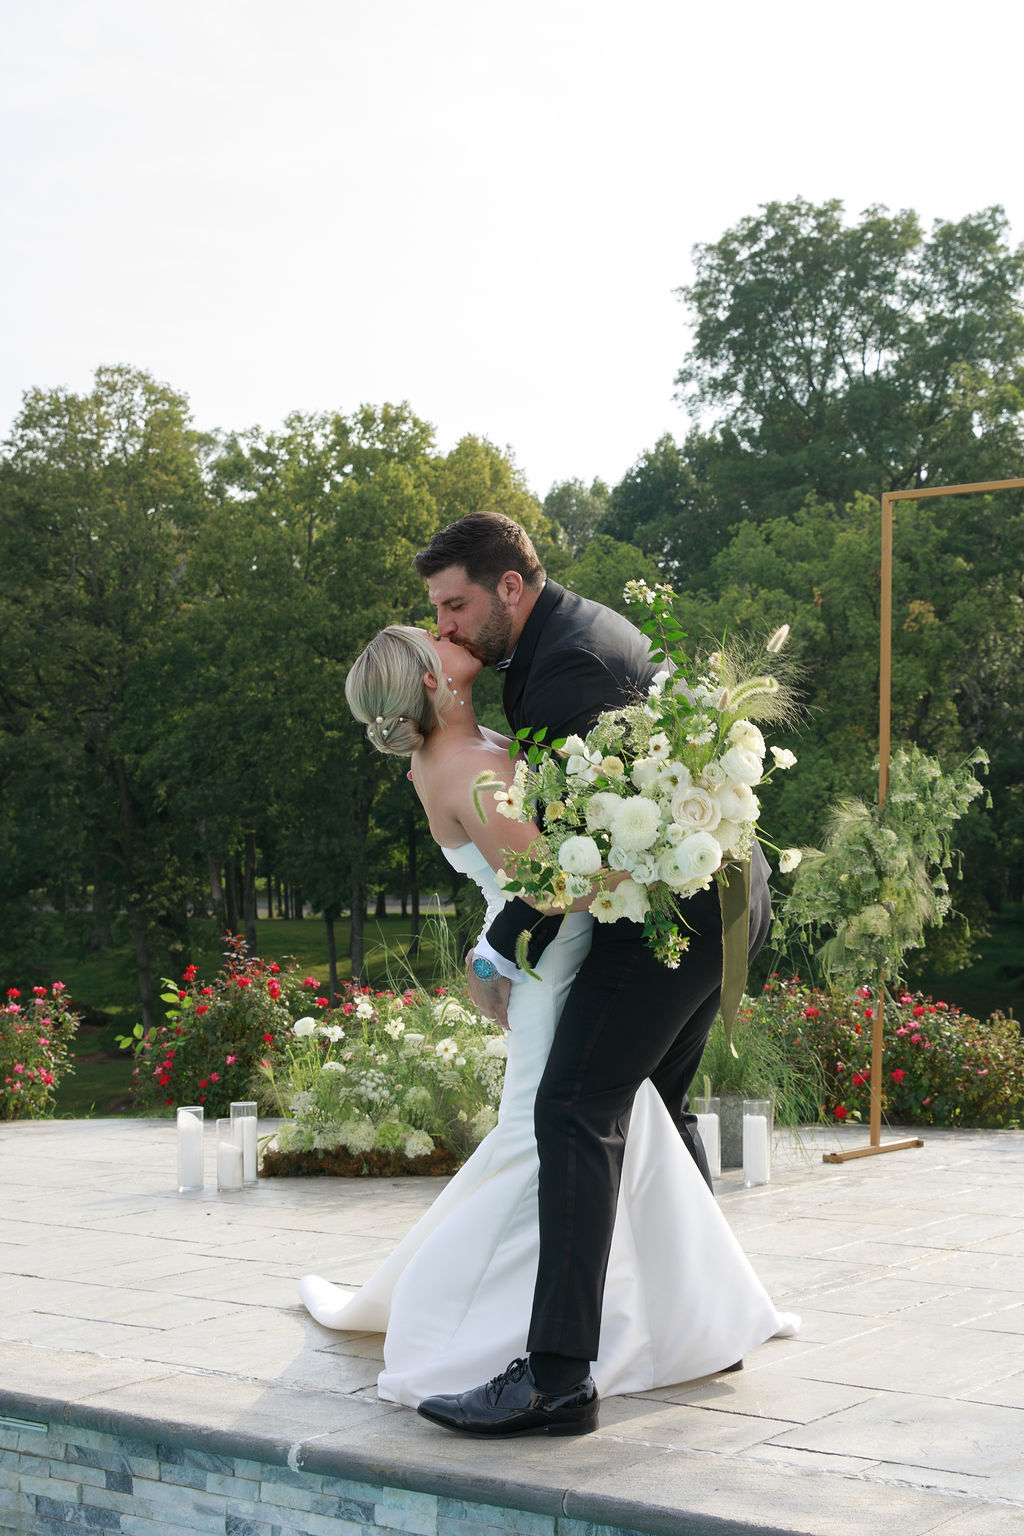 Newlyweds kiss on a stone patio with a dip